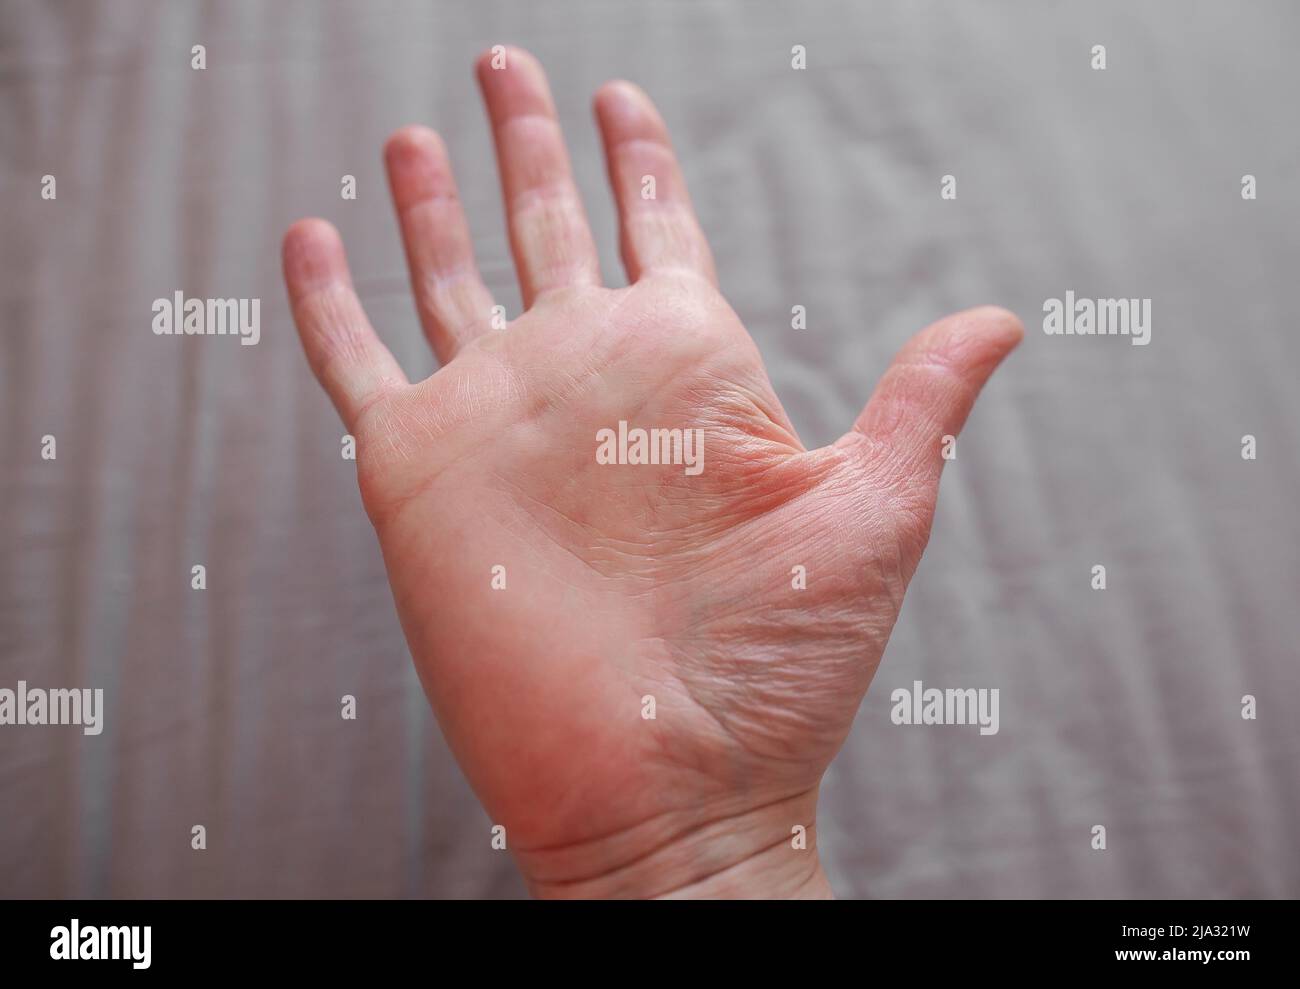 Hand of person with Ehlers-Danlos Syndrome, with dry stretchy old-looking skin, EDS wrinkled skin Stock Photo